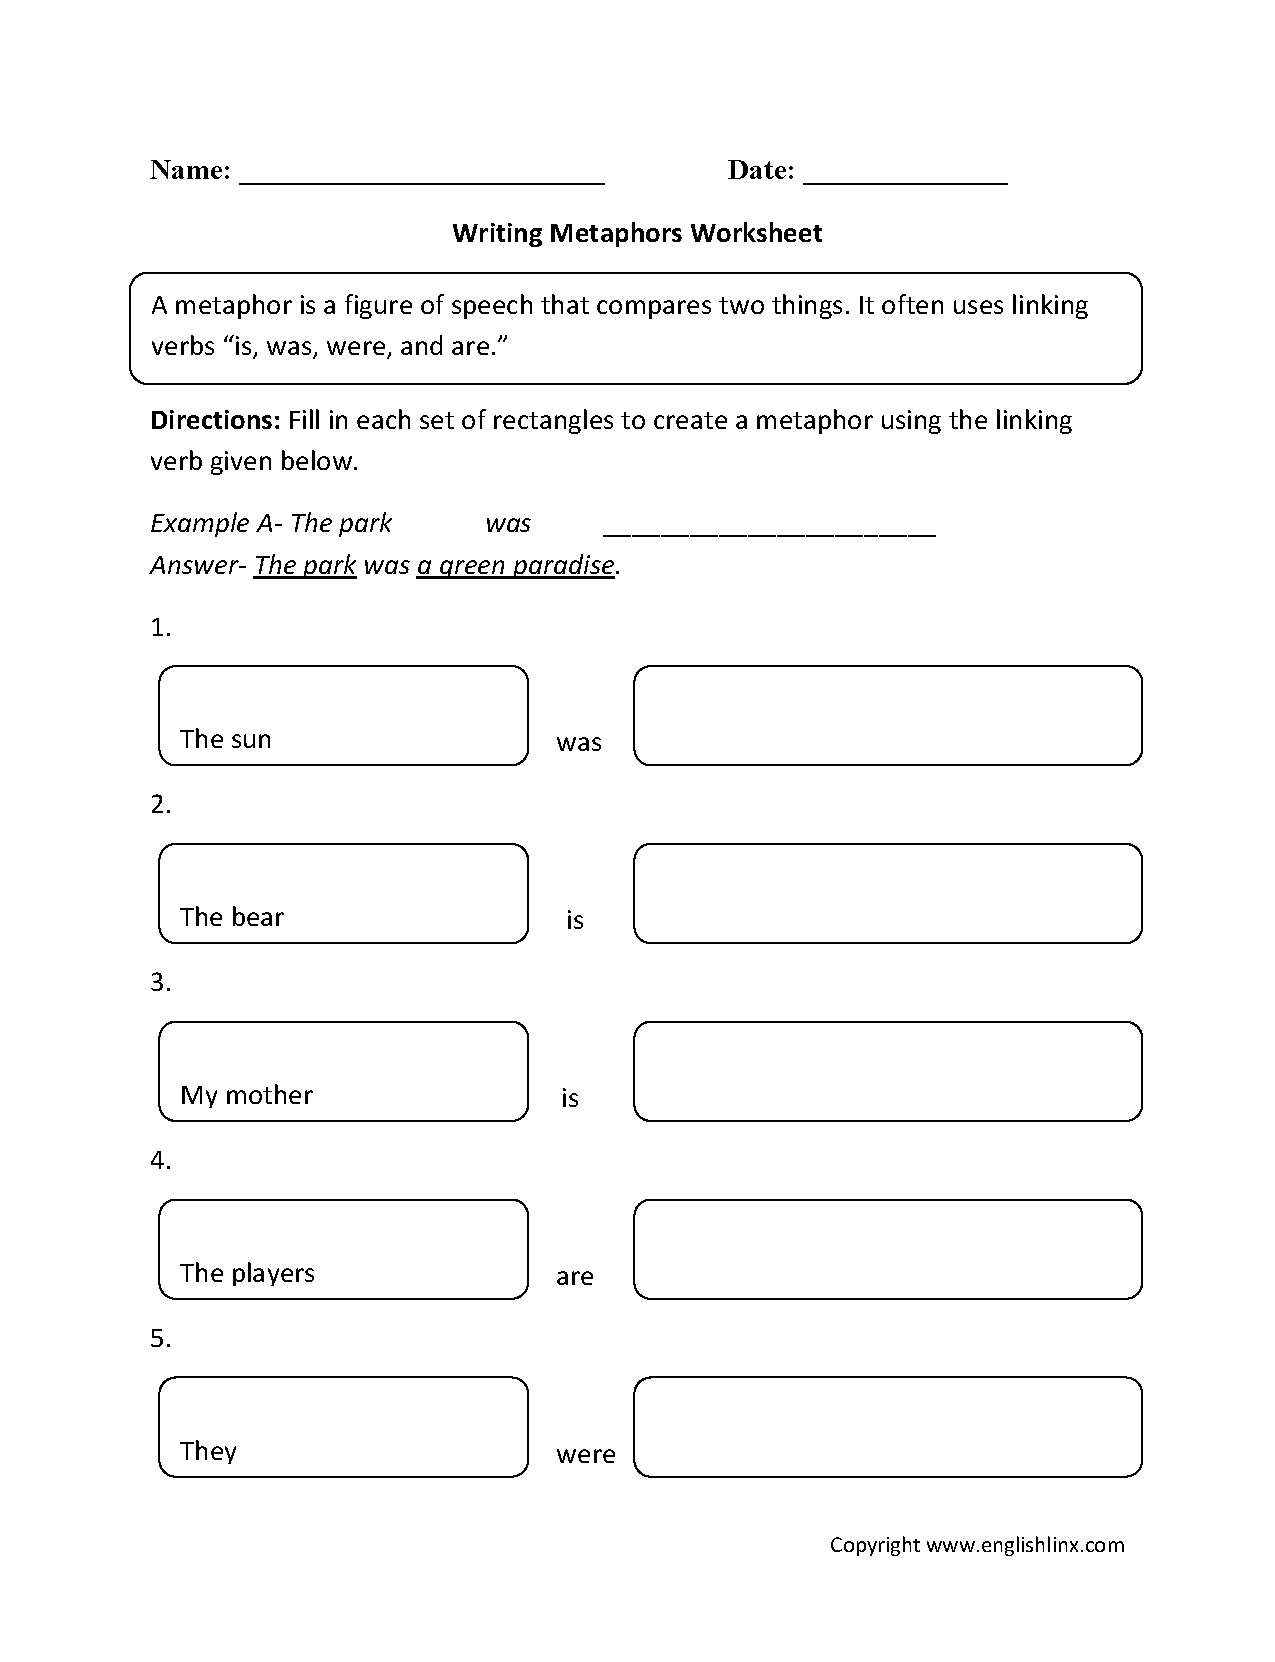 13 Best Images of Metaphors And Similes Worksheets 5th Grade Similes